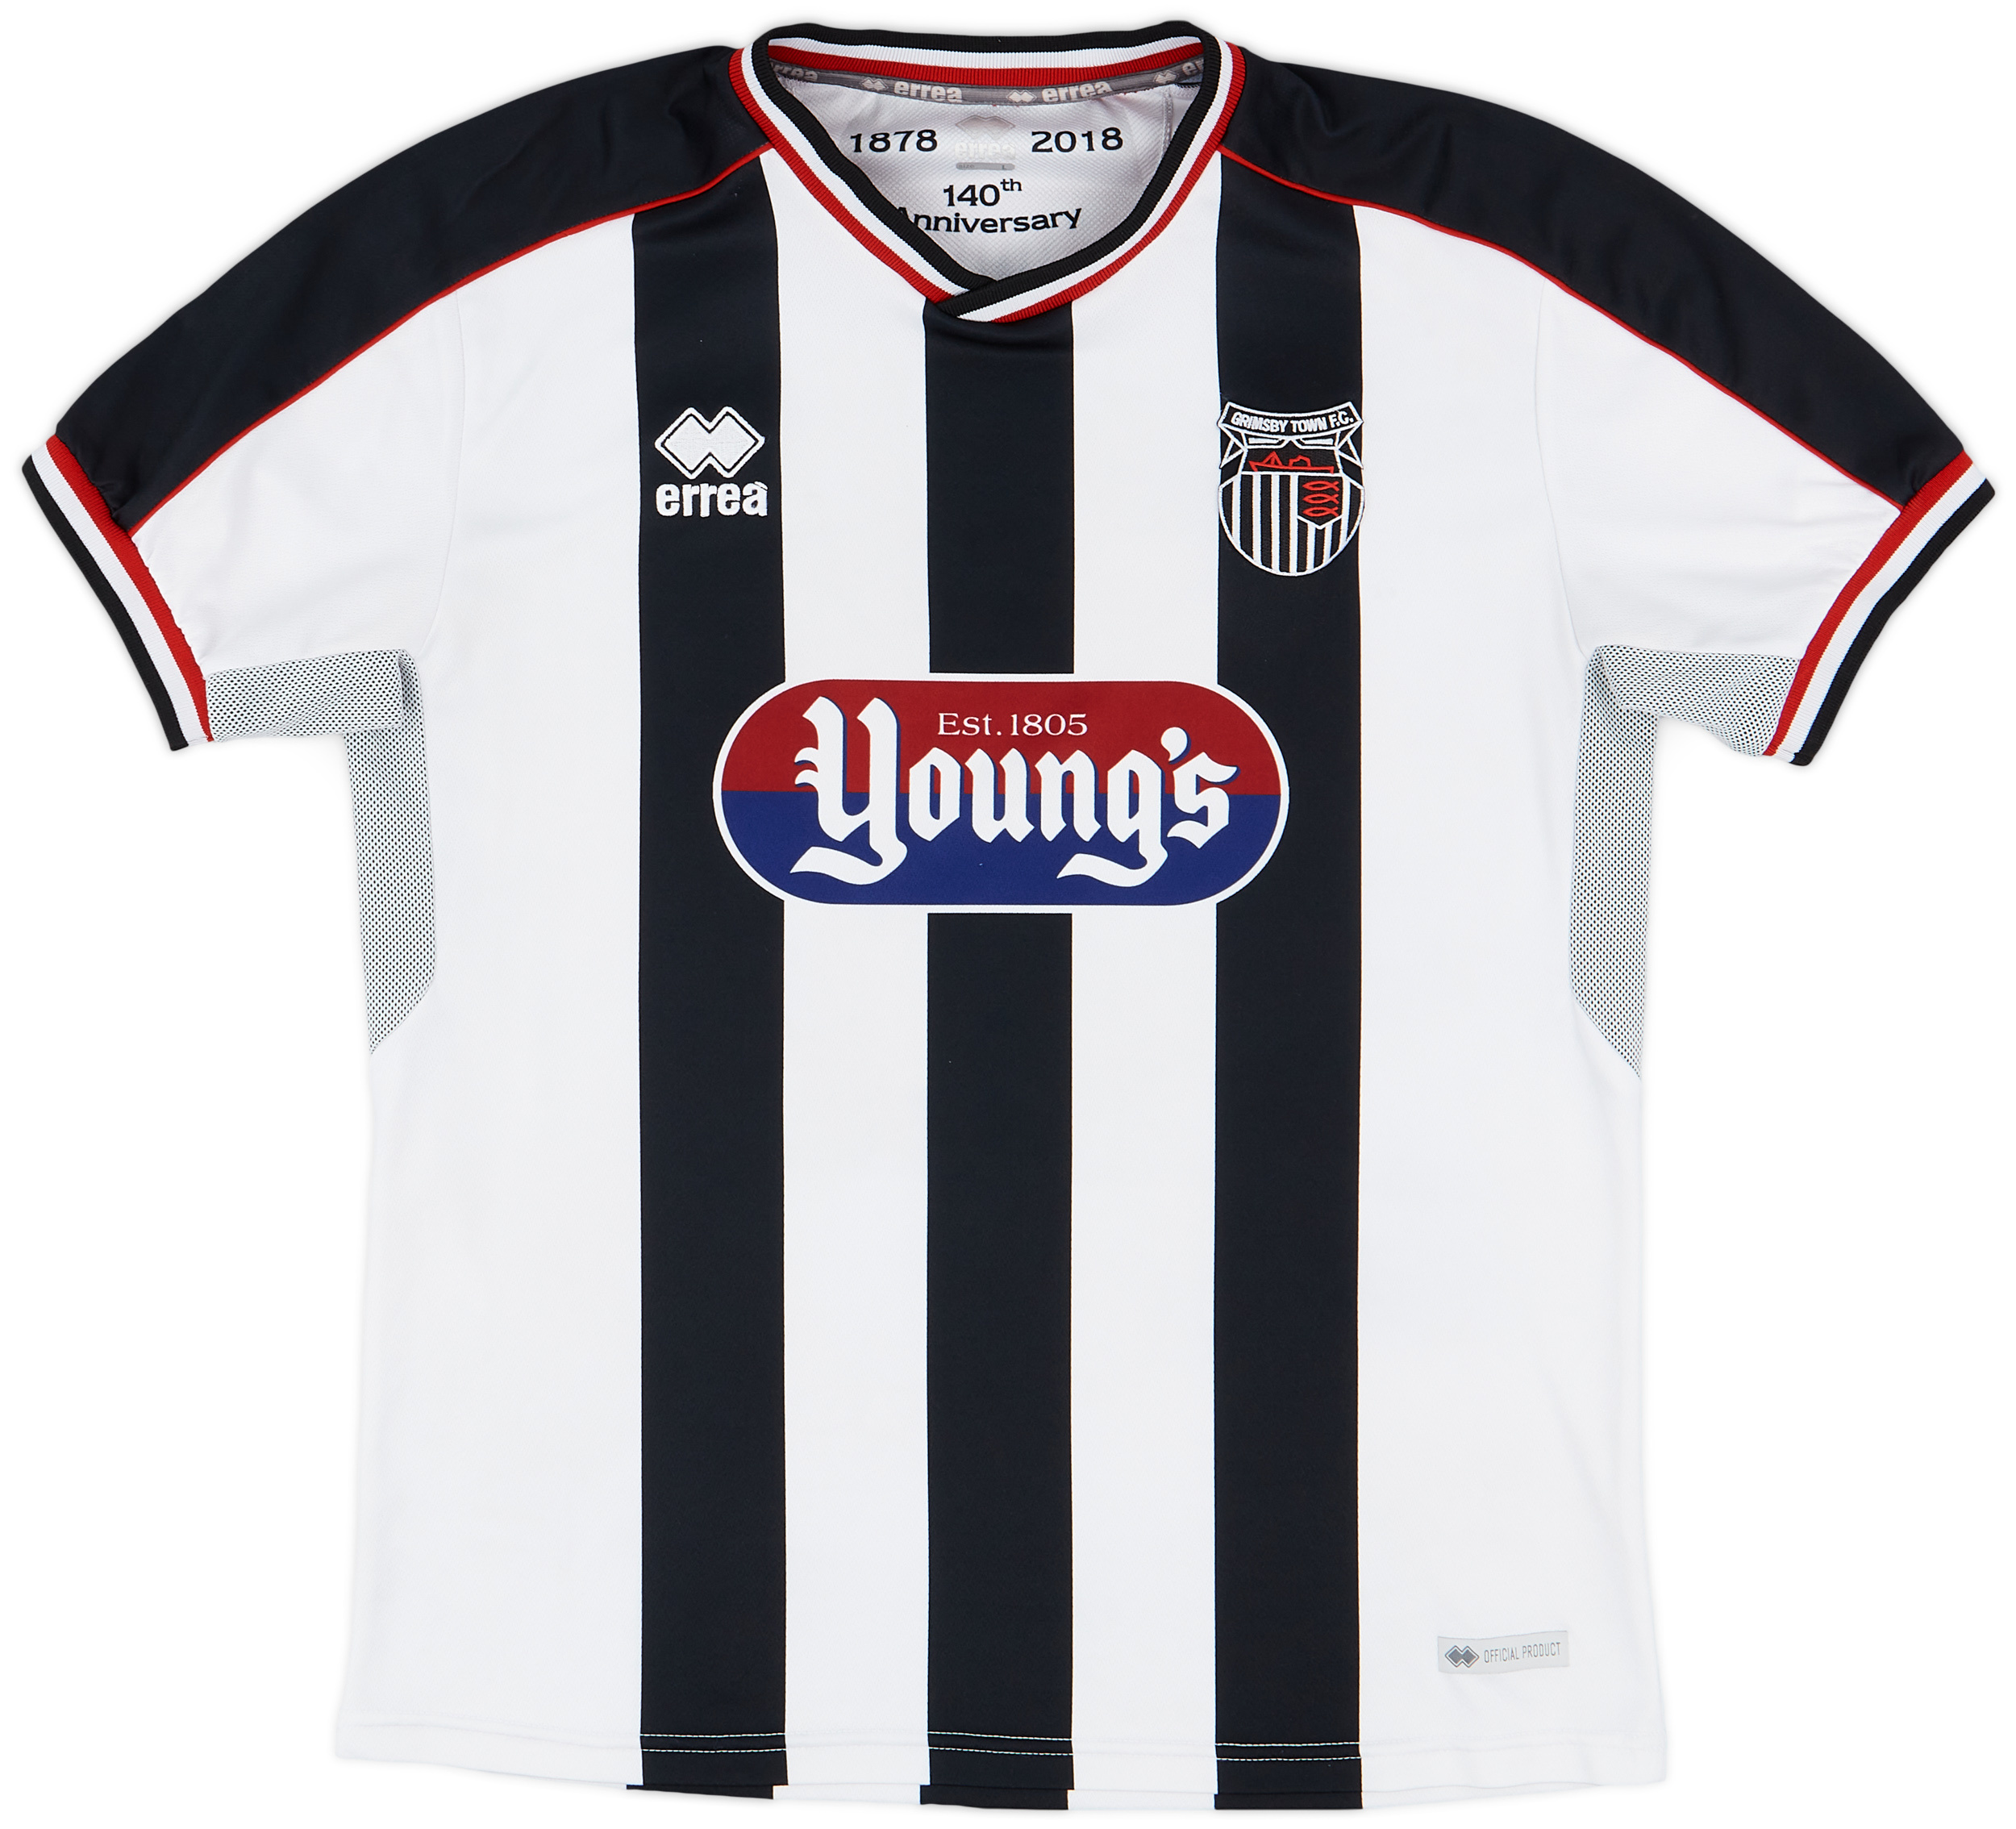 2018-19 Grimsby Town Home Shirt - 9/10 - ()